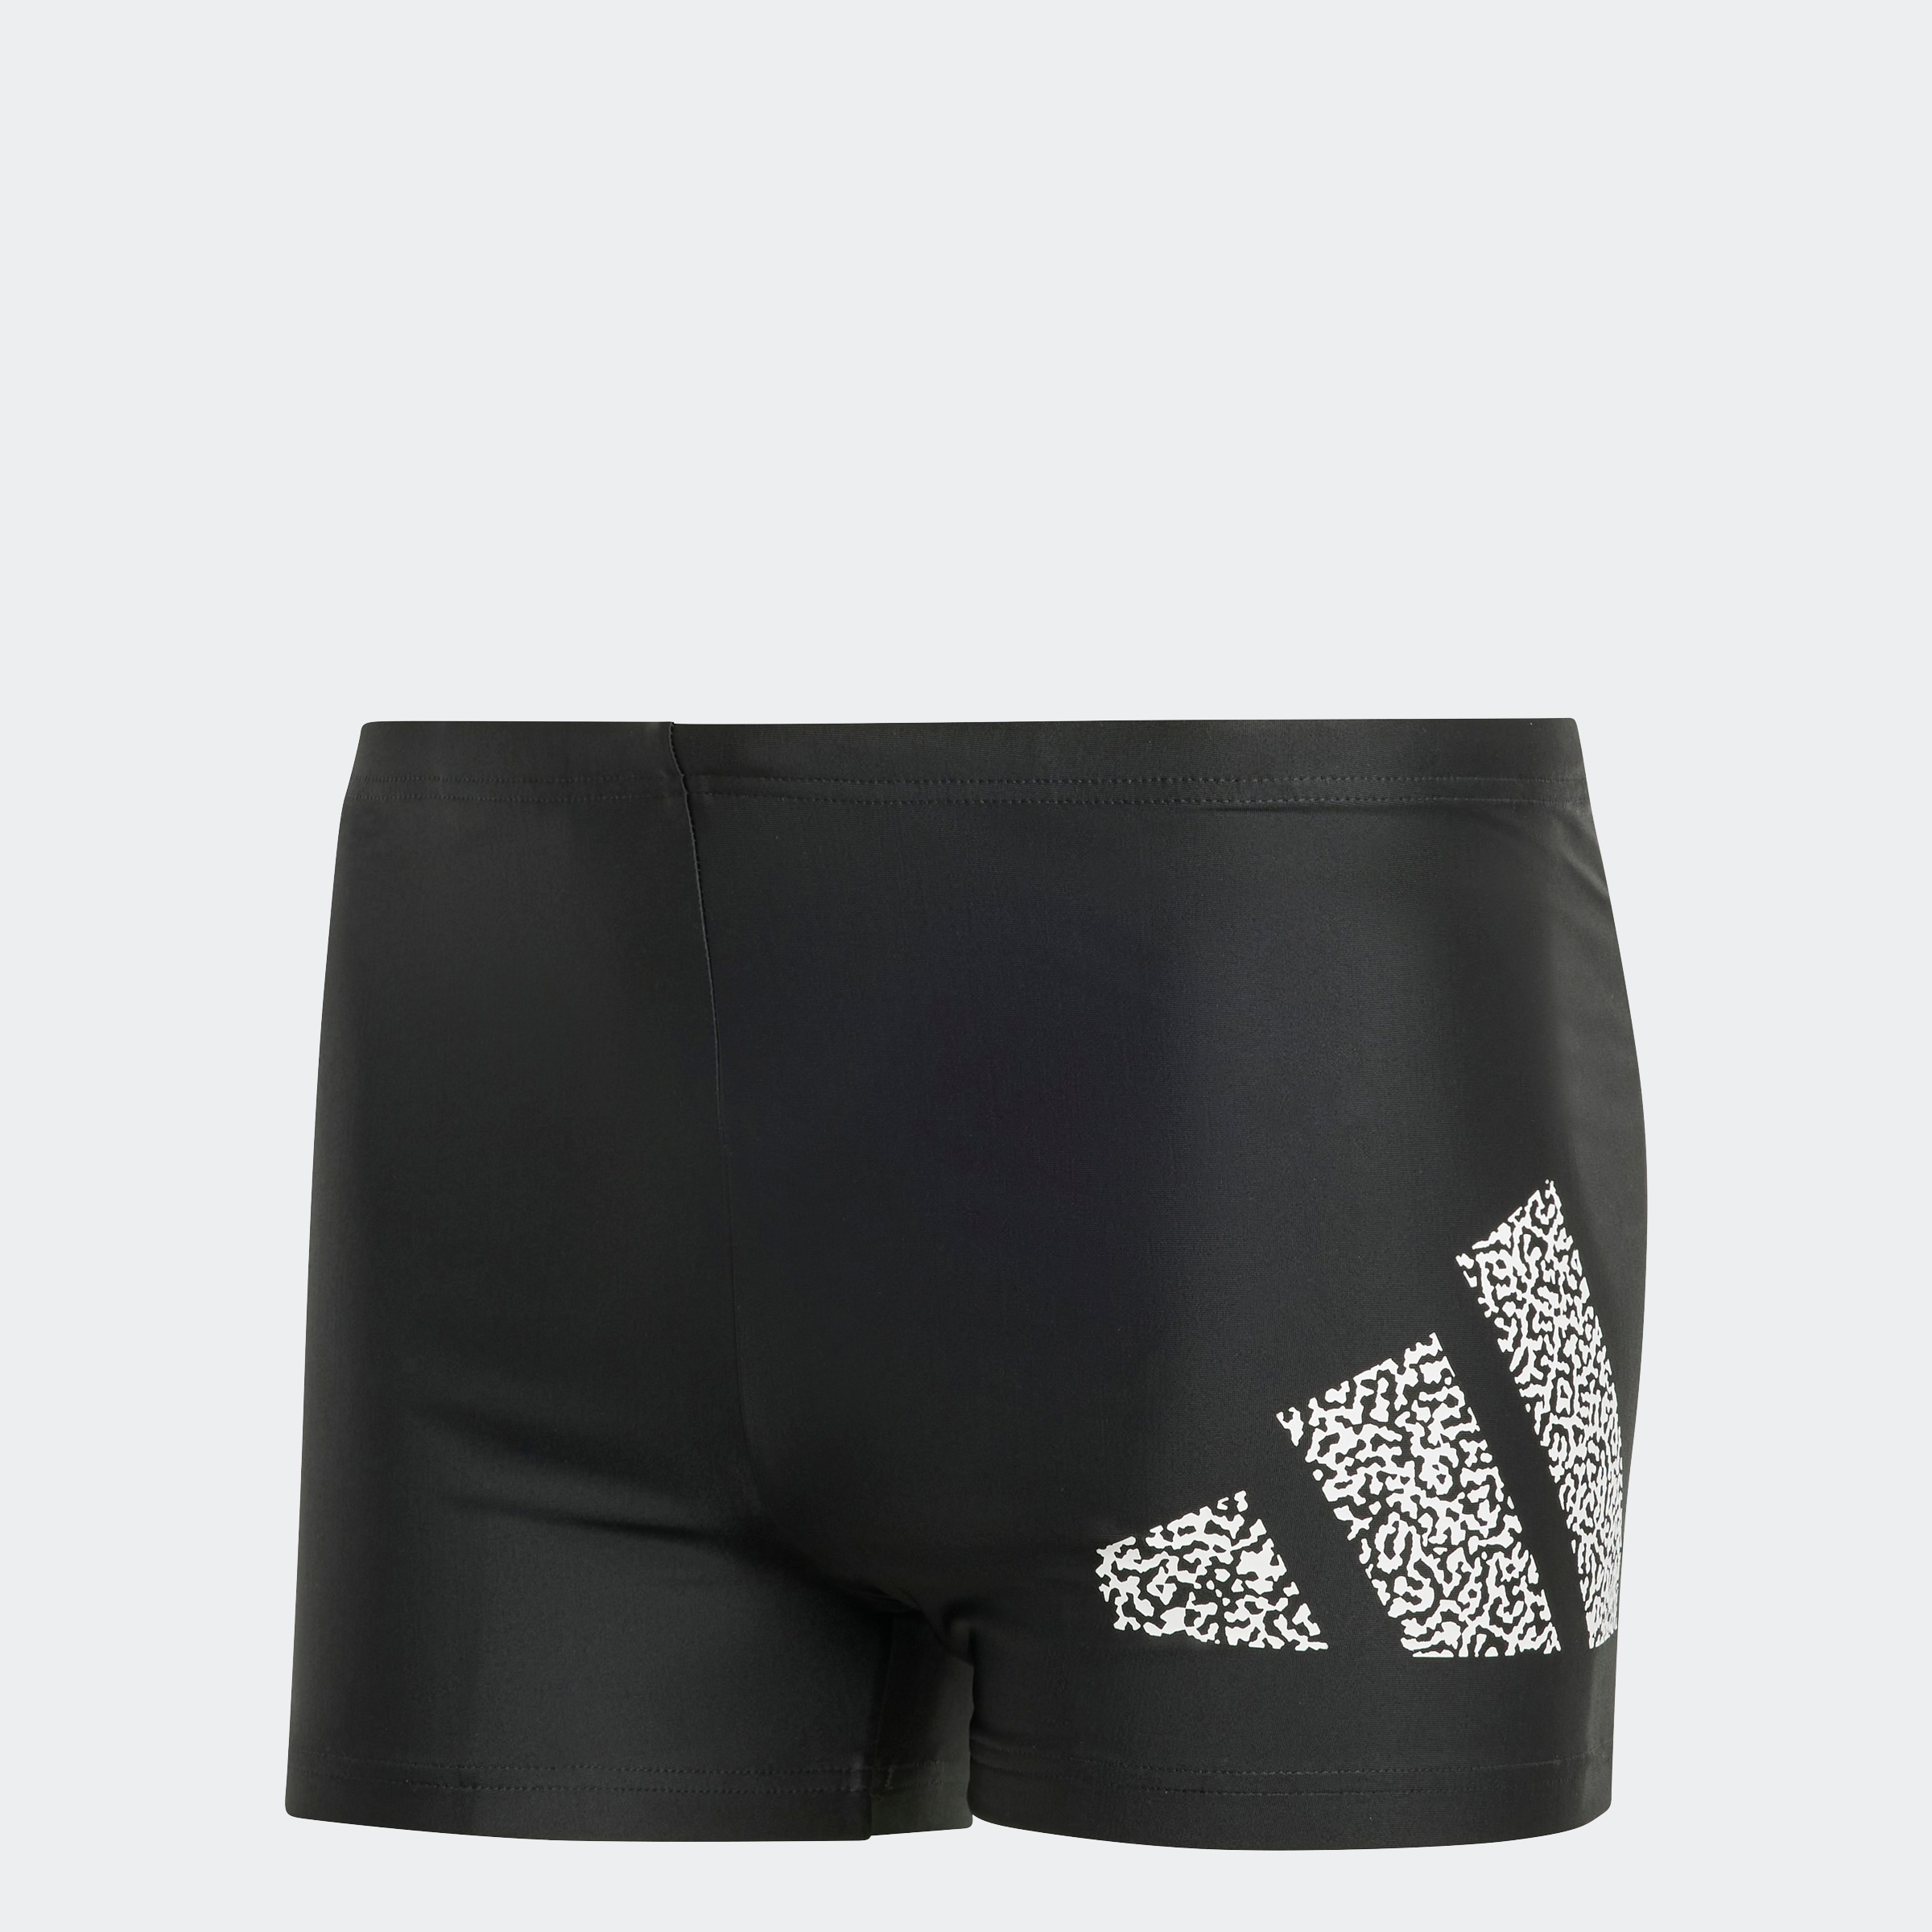 adidas Performance Badehose OTTO »BRANDED St.) (1 bei BOXER-«, online